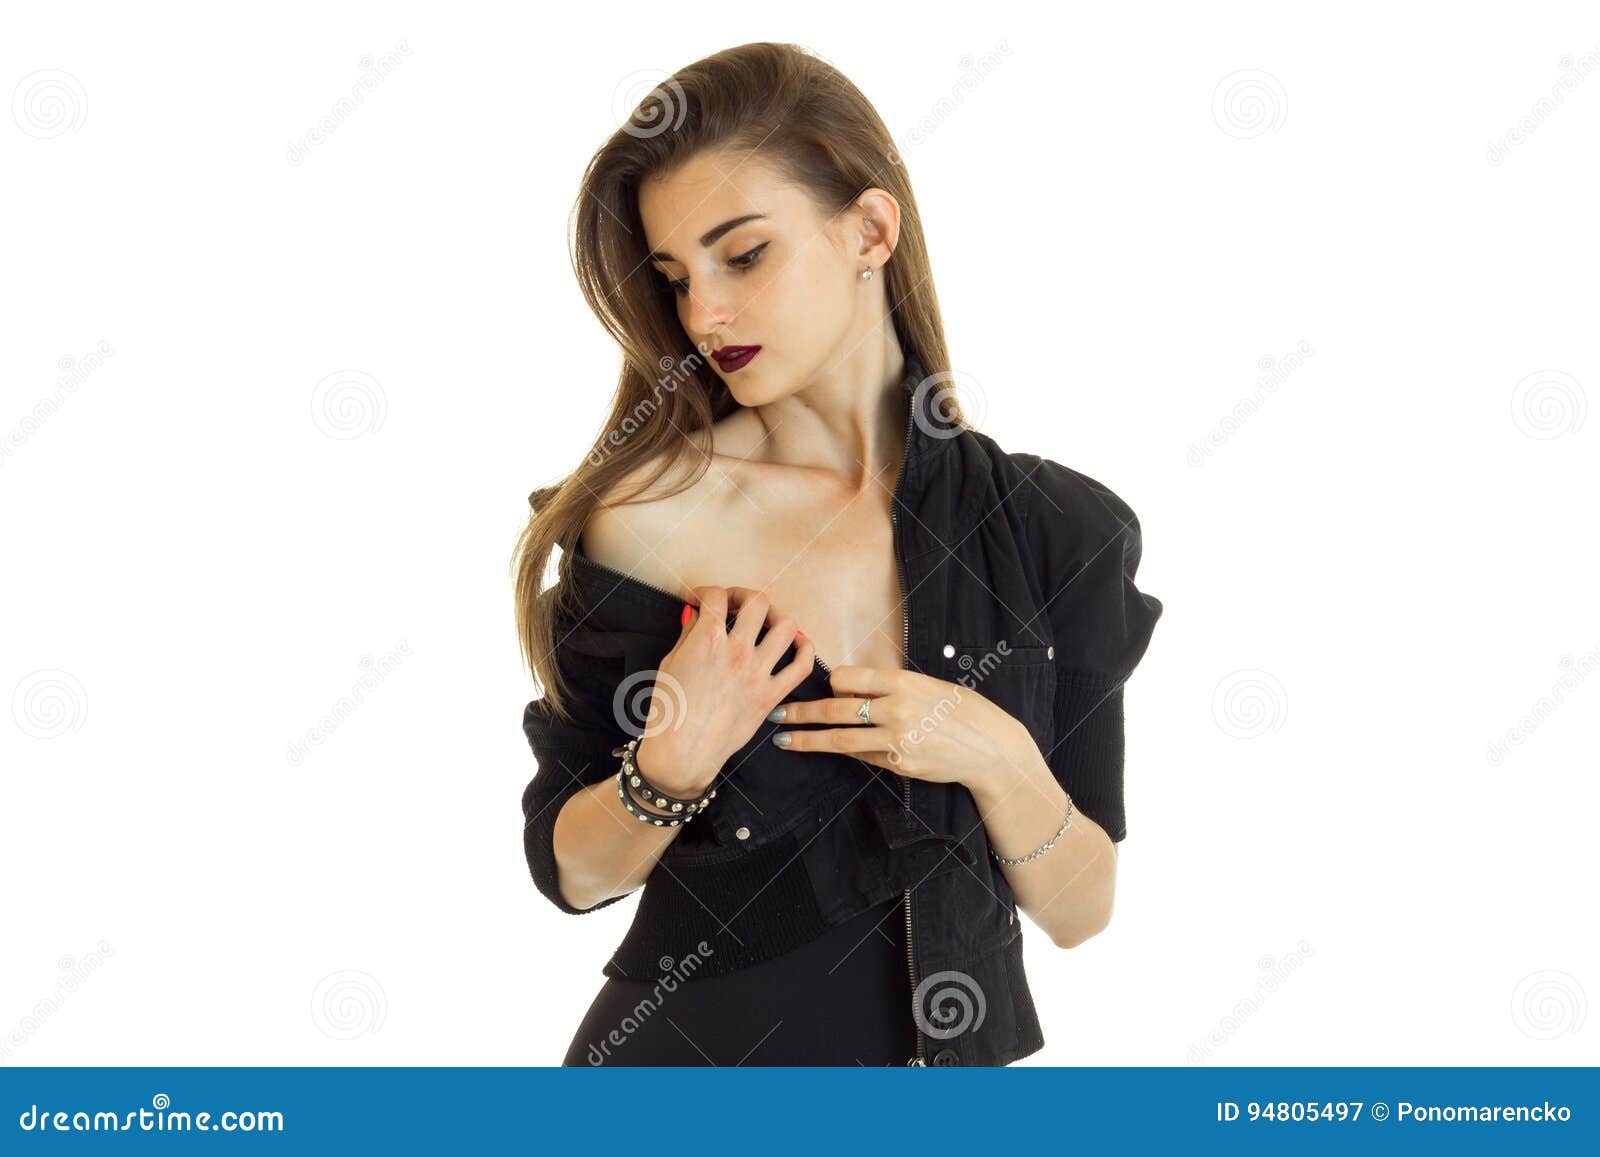 https://thumbs.dreamstime.com/z/young-woman-black-jacket-bra-looking-down-isolated-white-background-94805497.jpg